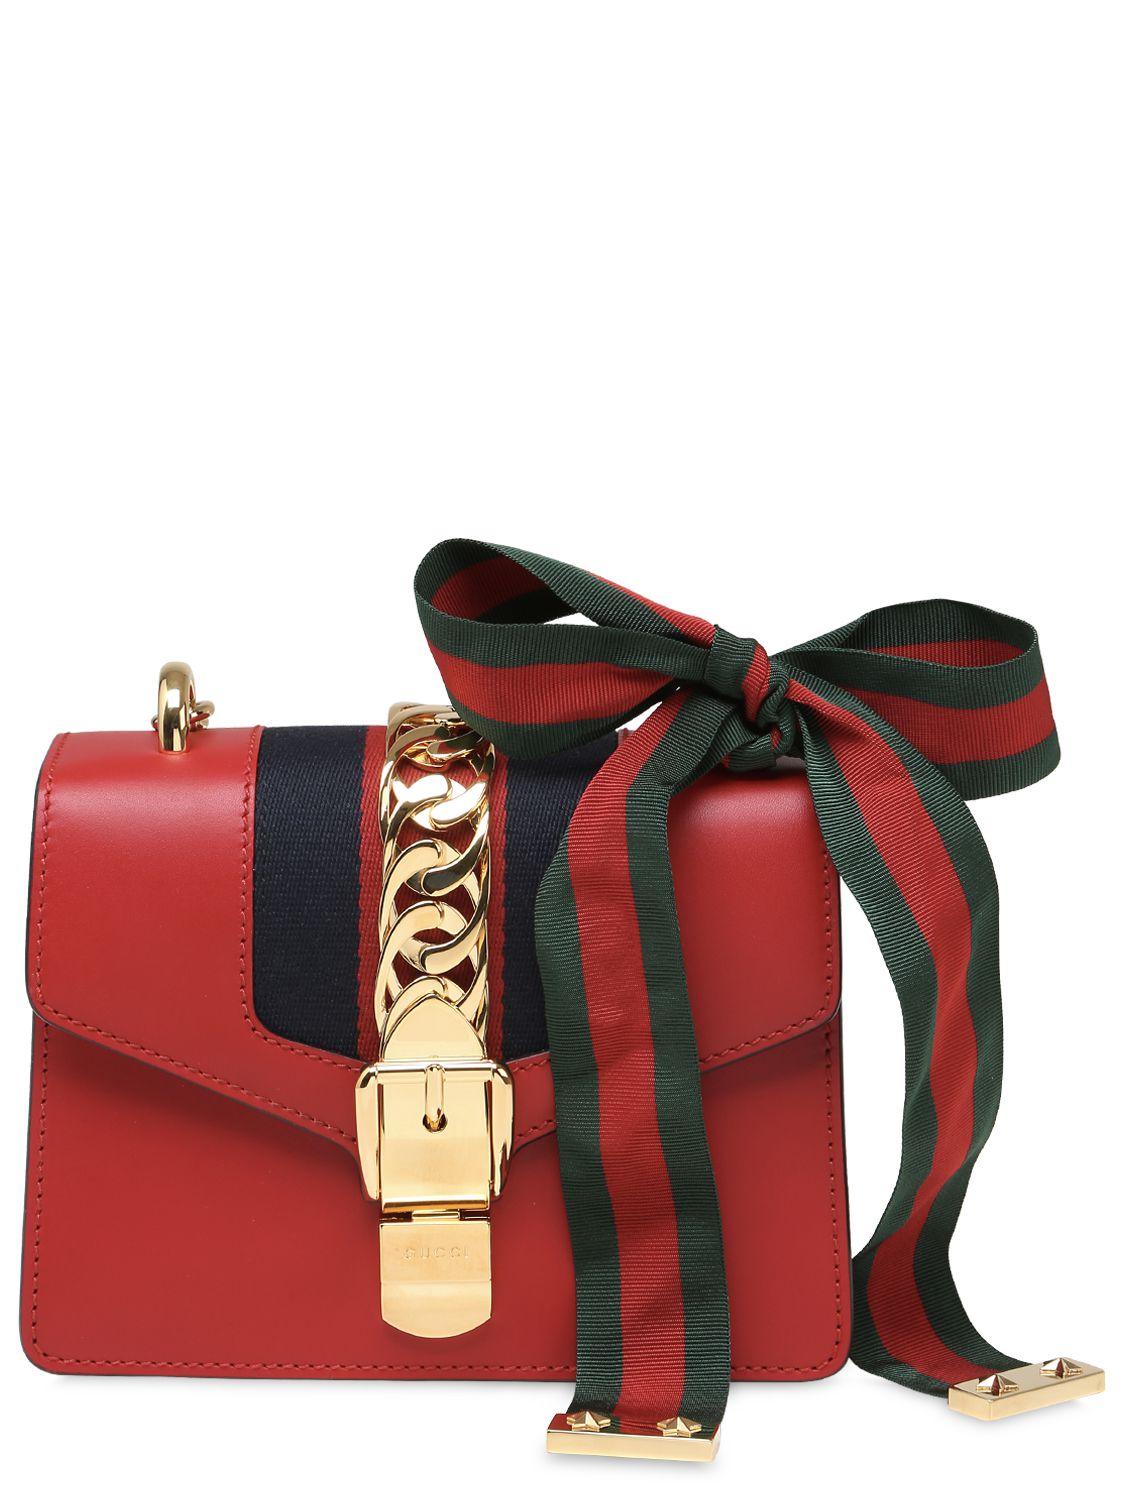 Gucci Mini Sylvie Leather Chain Shoulder Bag in Red - Lyst